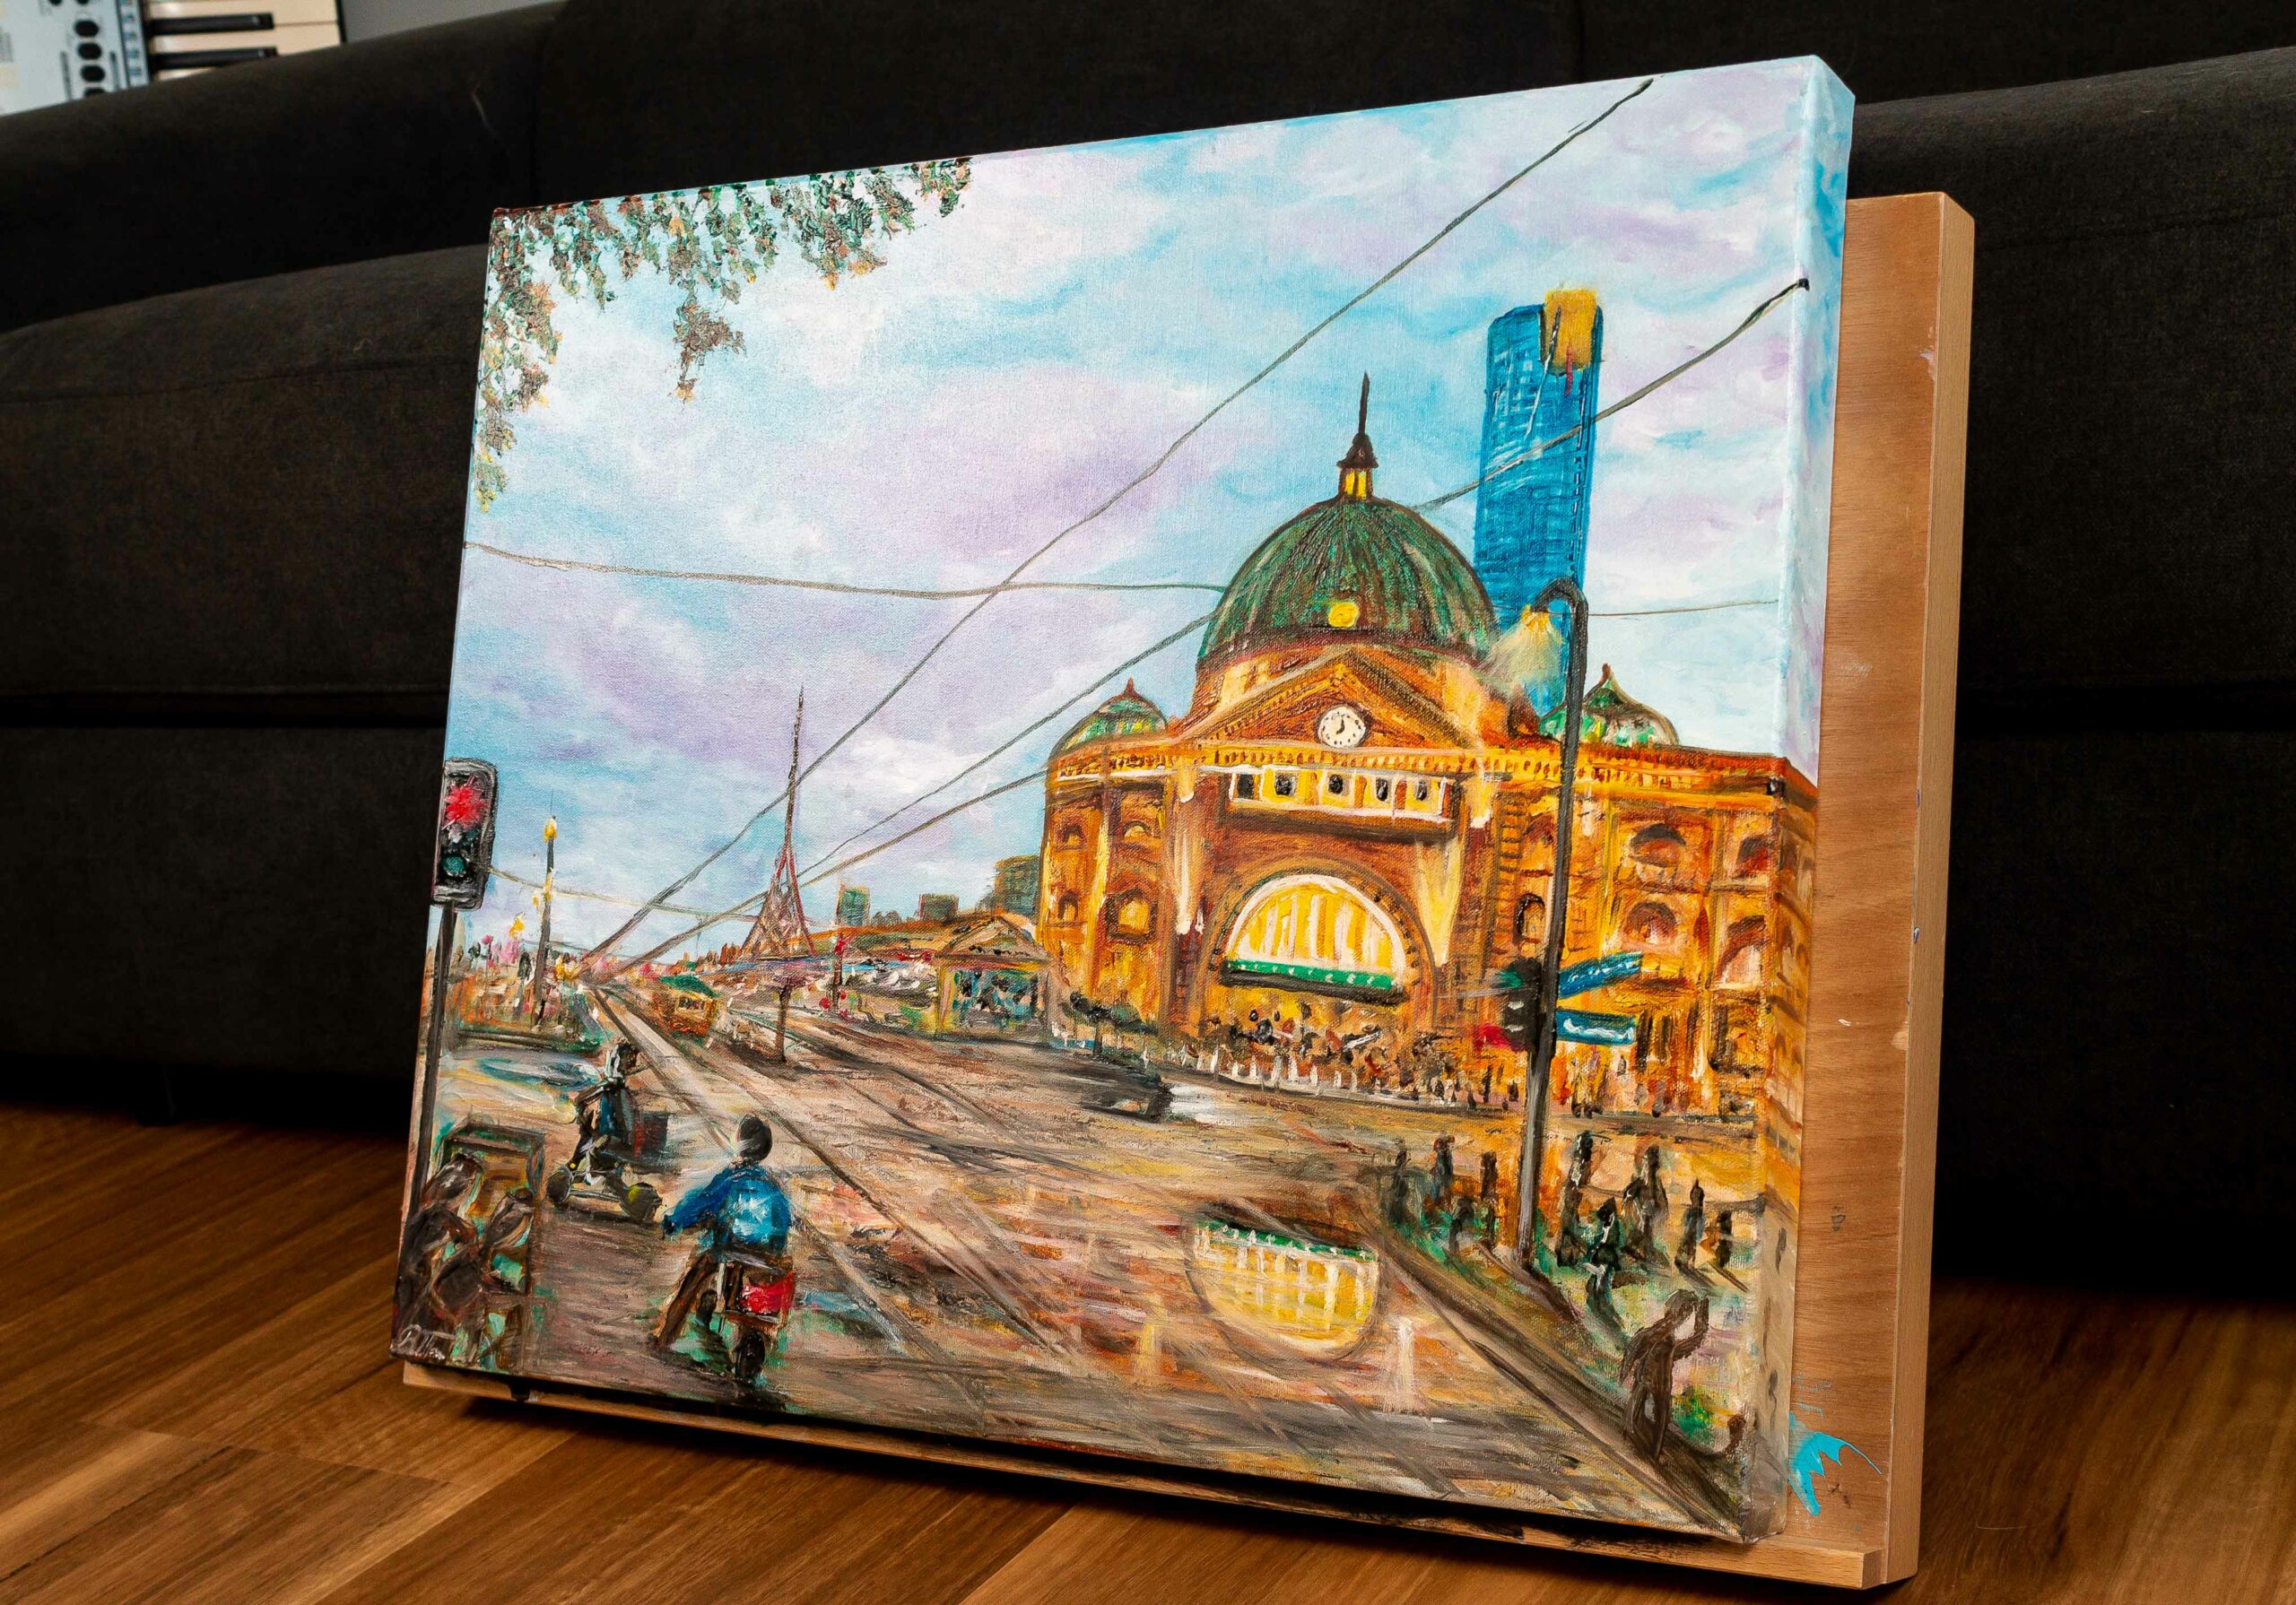 Acrylic painting showing a train station lit up in yellow and gold, with a blue and purple sky, and many people/drivers/motorcyclists in the foreground going about their business.